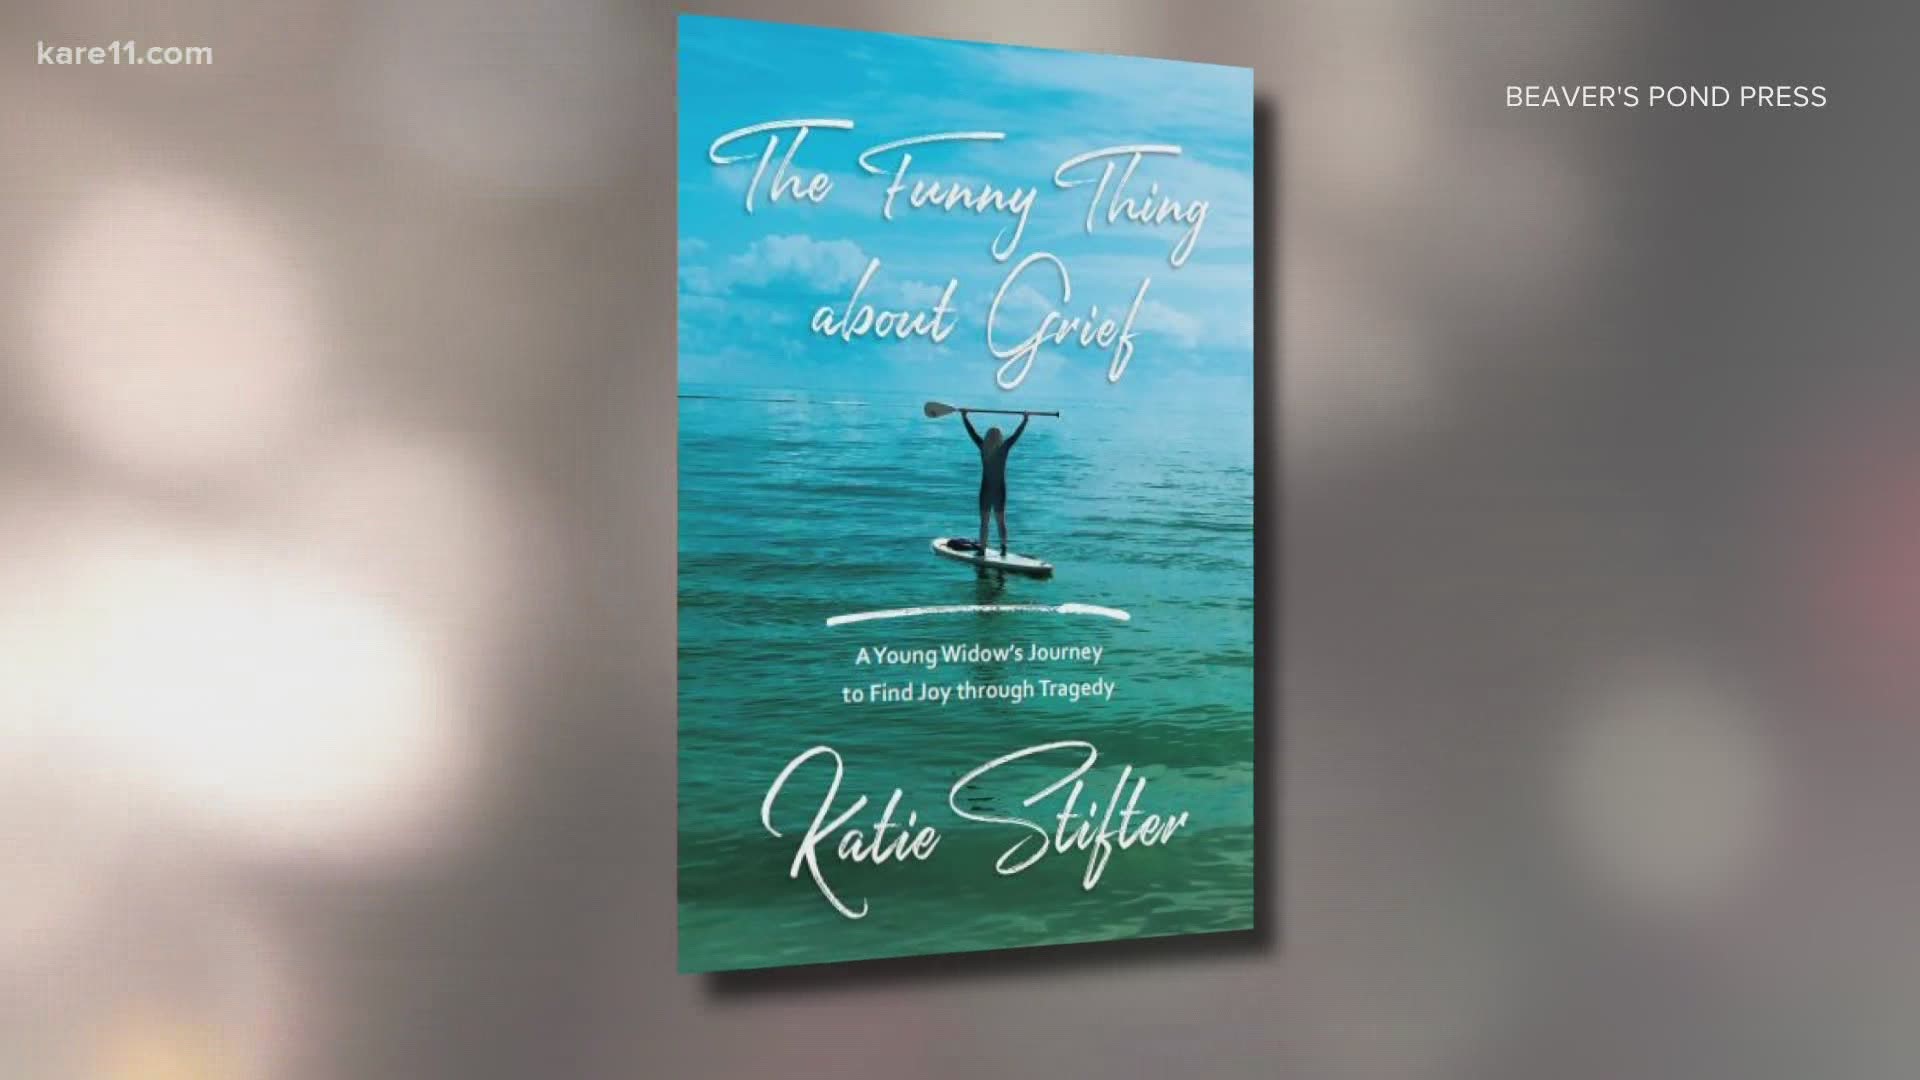 In 2016, Katie Stifter, a Twin Cities mom of three, lost her husband Andy, and is sharing her journey in her new book.